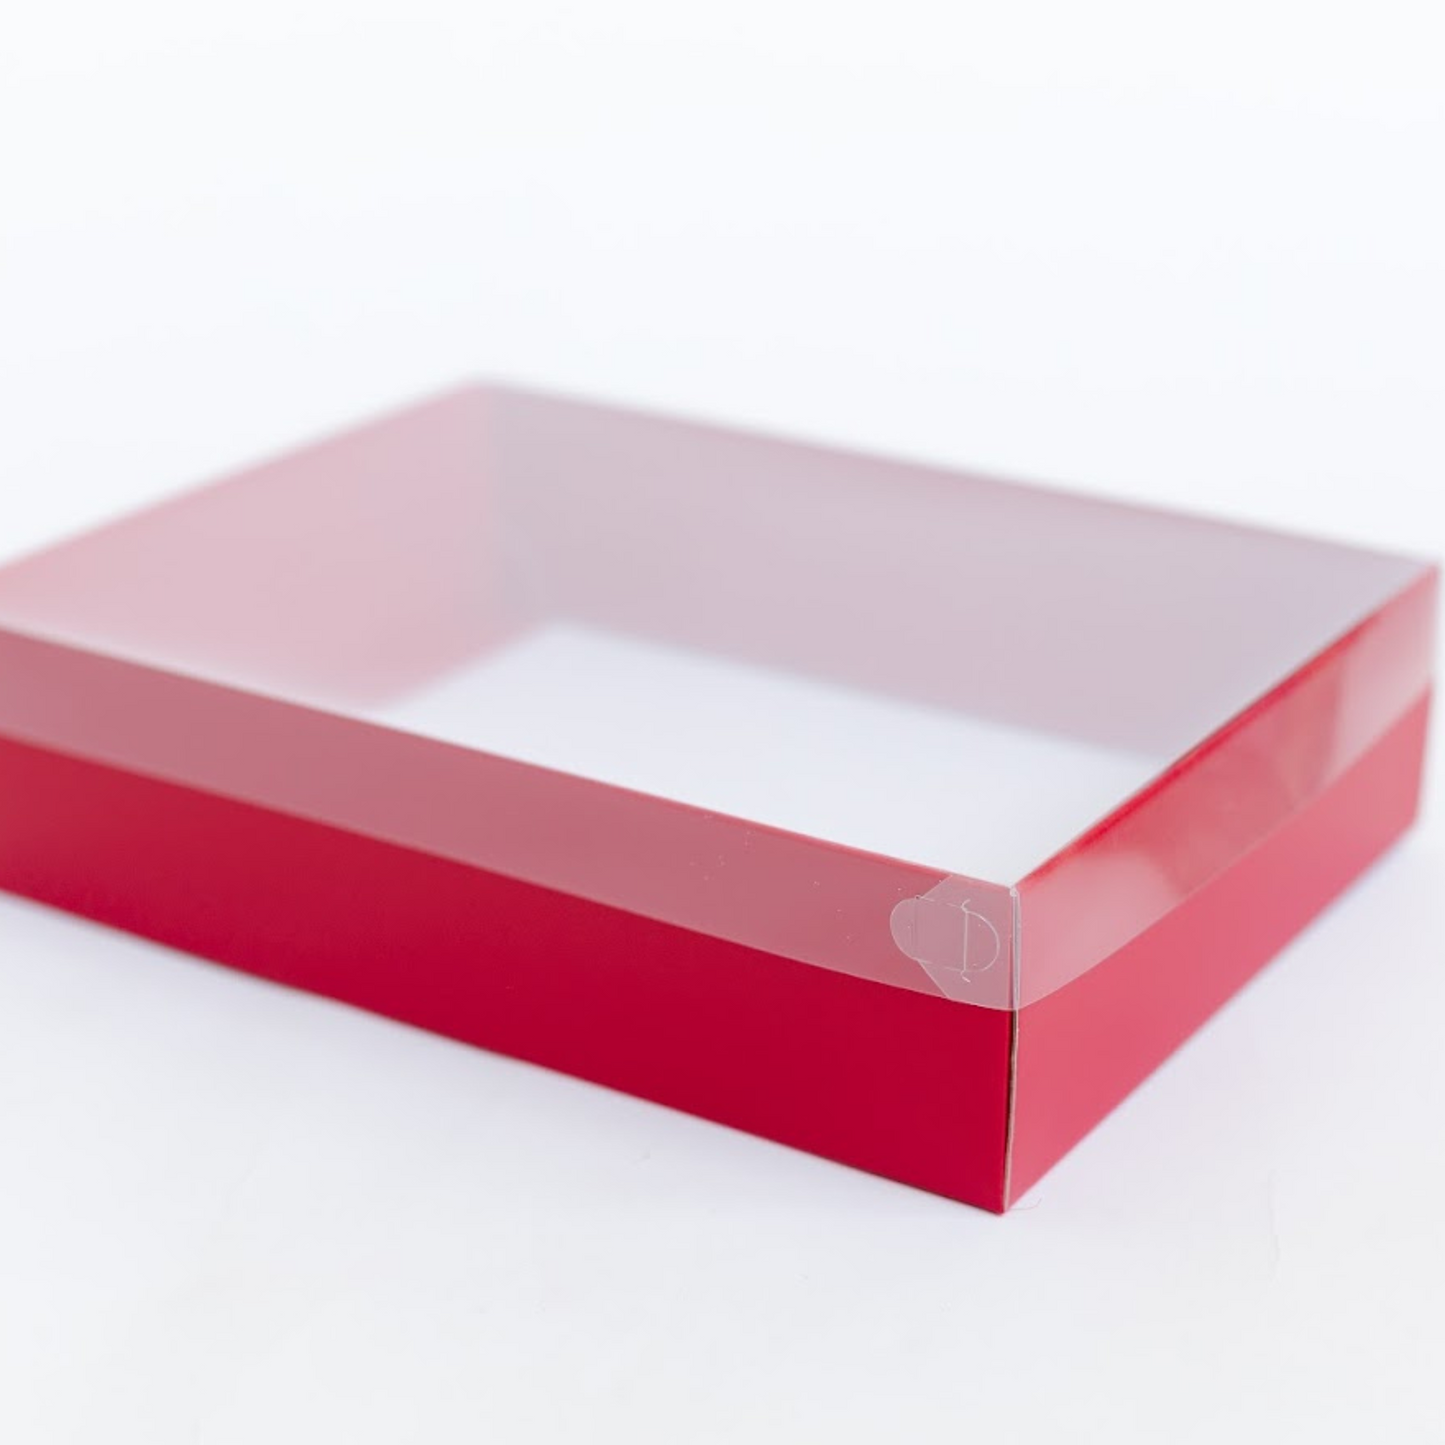 red suit packaging clear lid boxes 